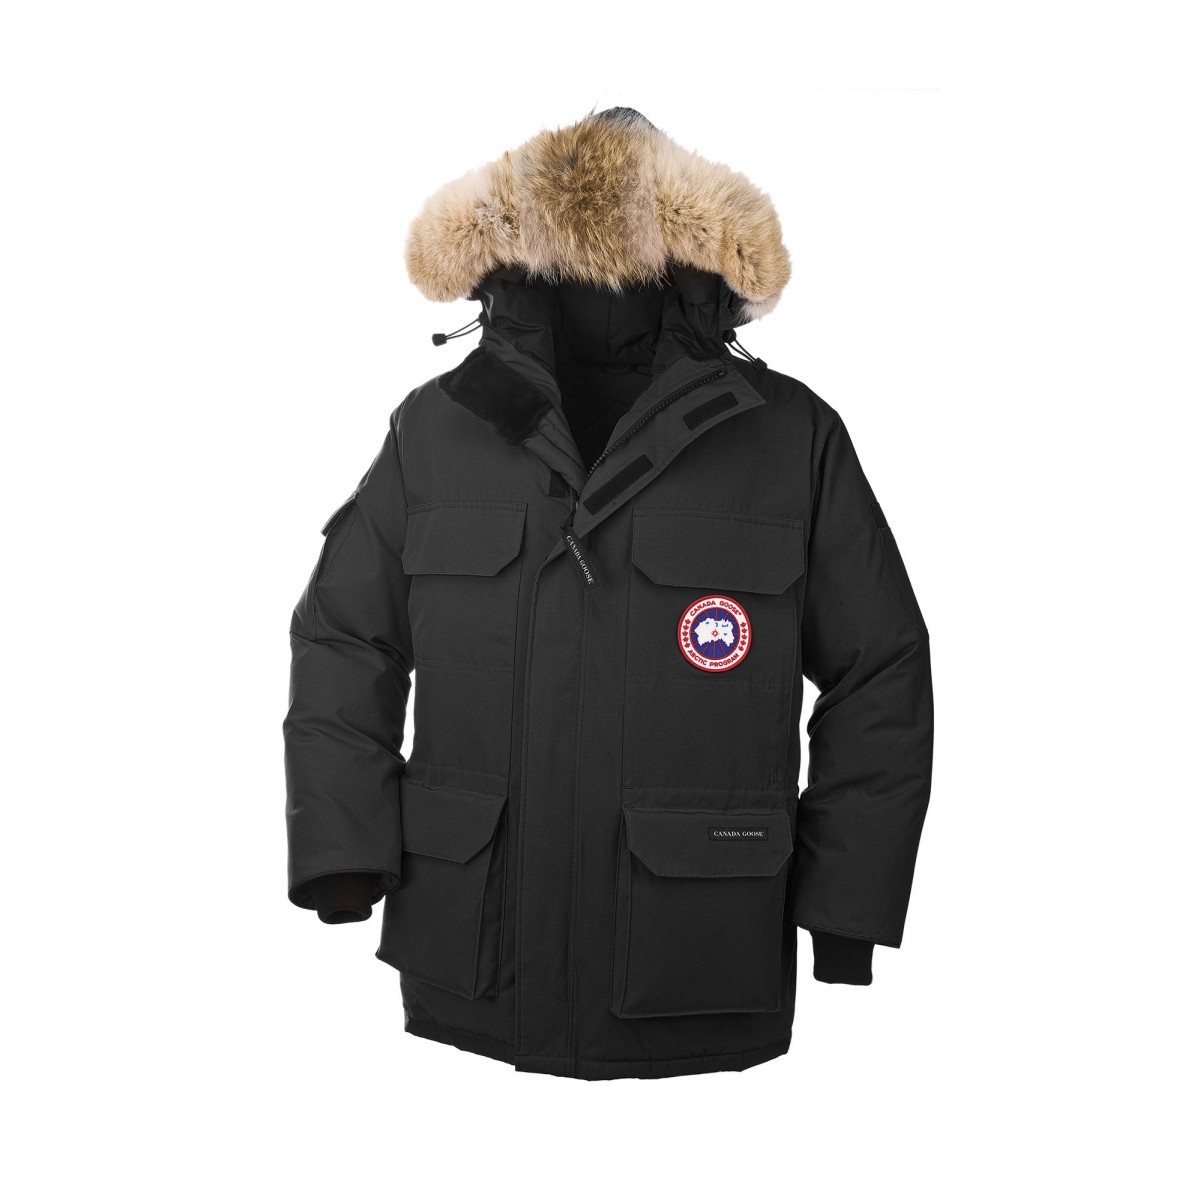 Canada Goose kids outlet discounts - 70% Off Cheap Canada Goose Jackets Sale